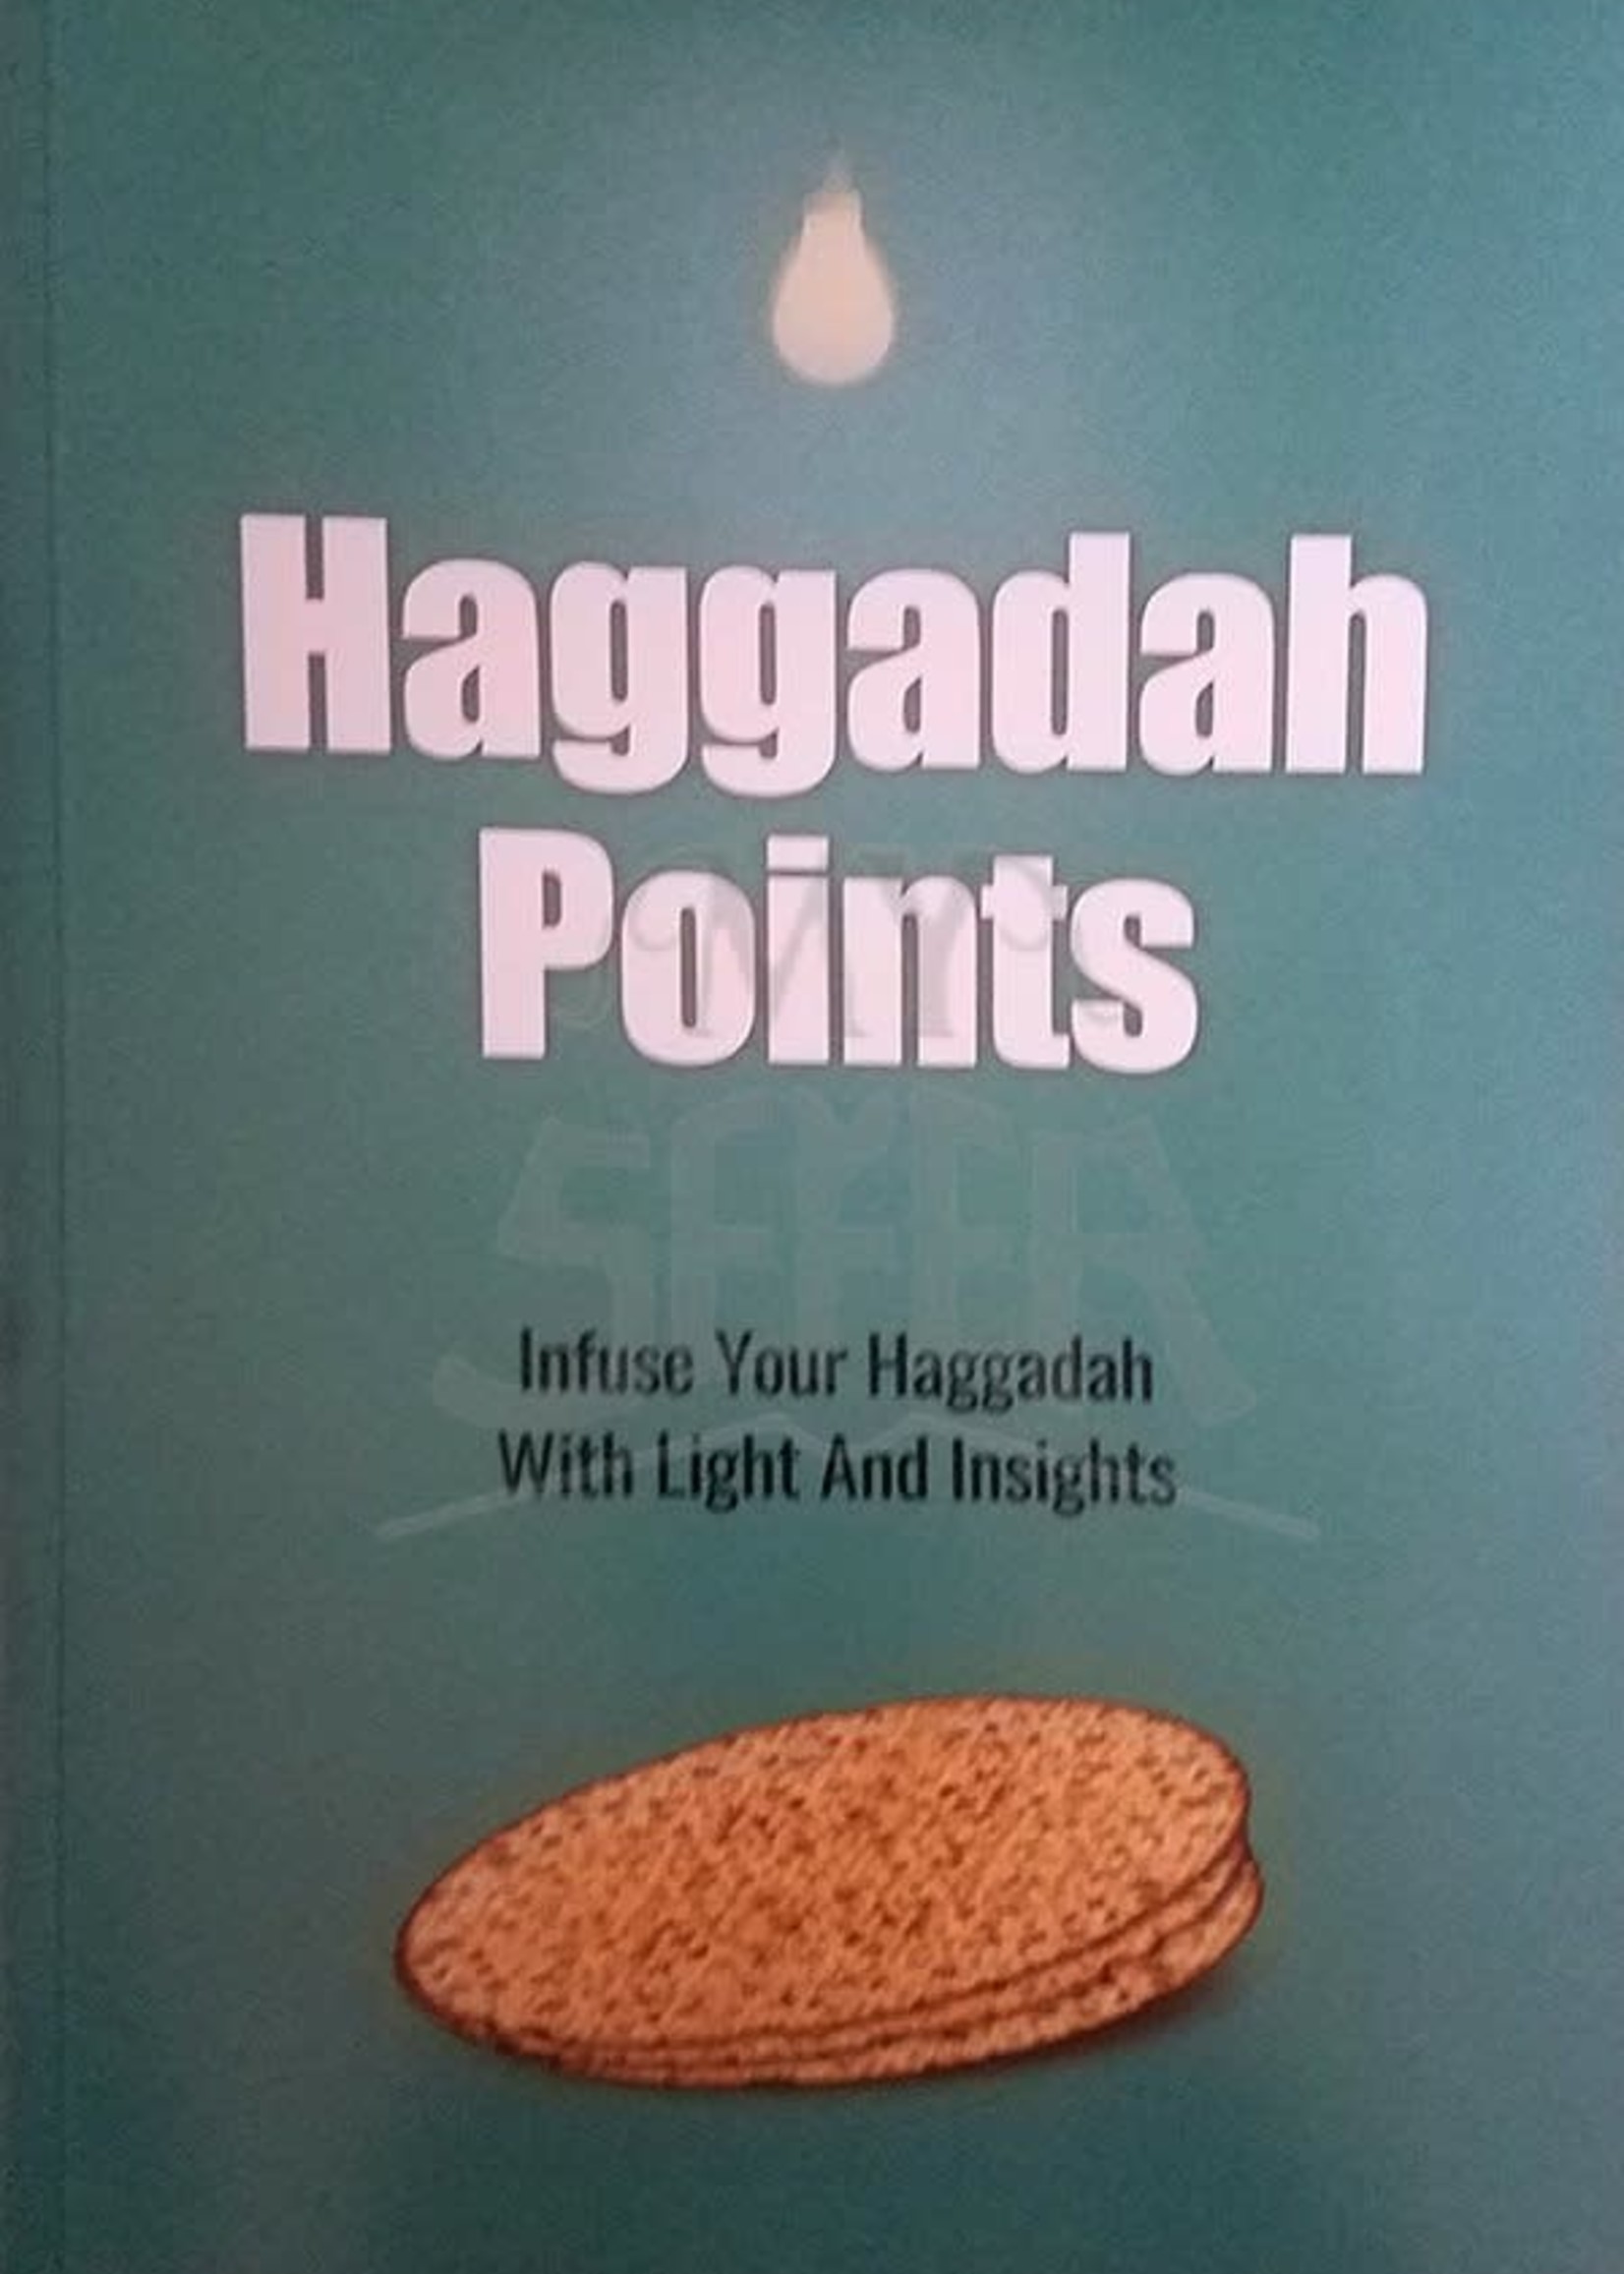 Haggadah Points - Infuse Your Haggadah With Light And Insight